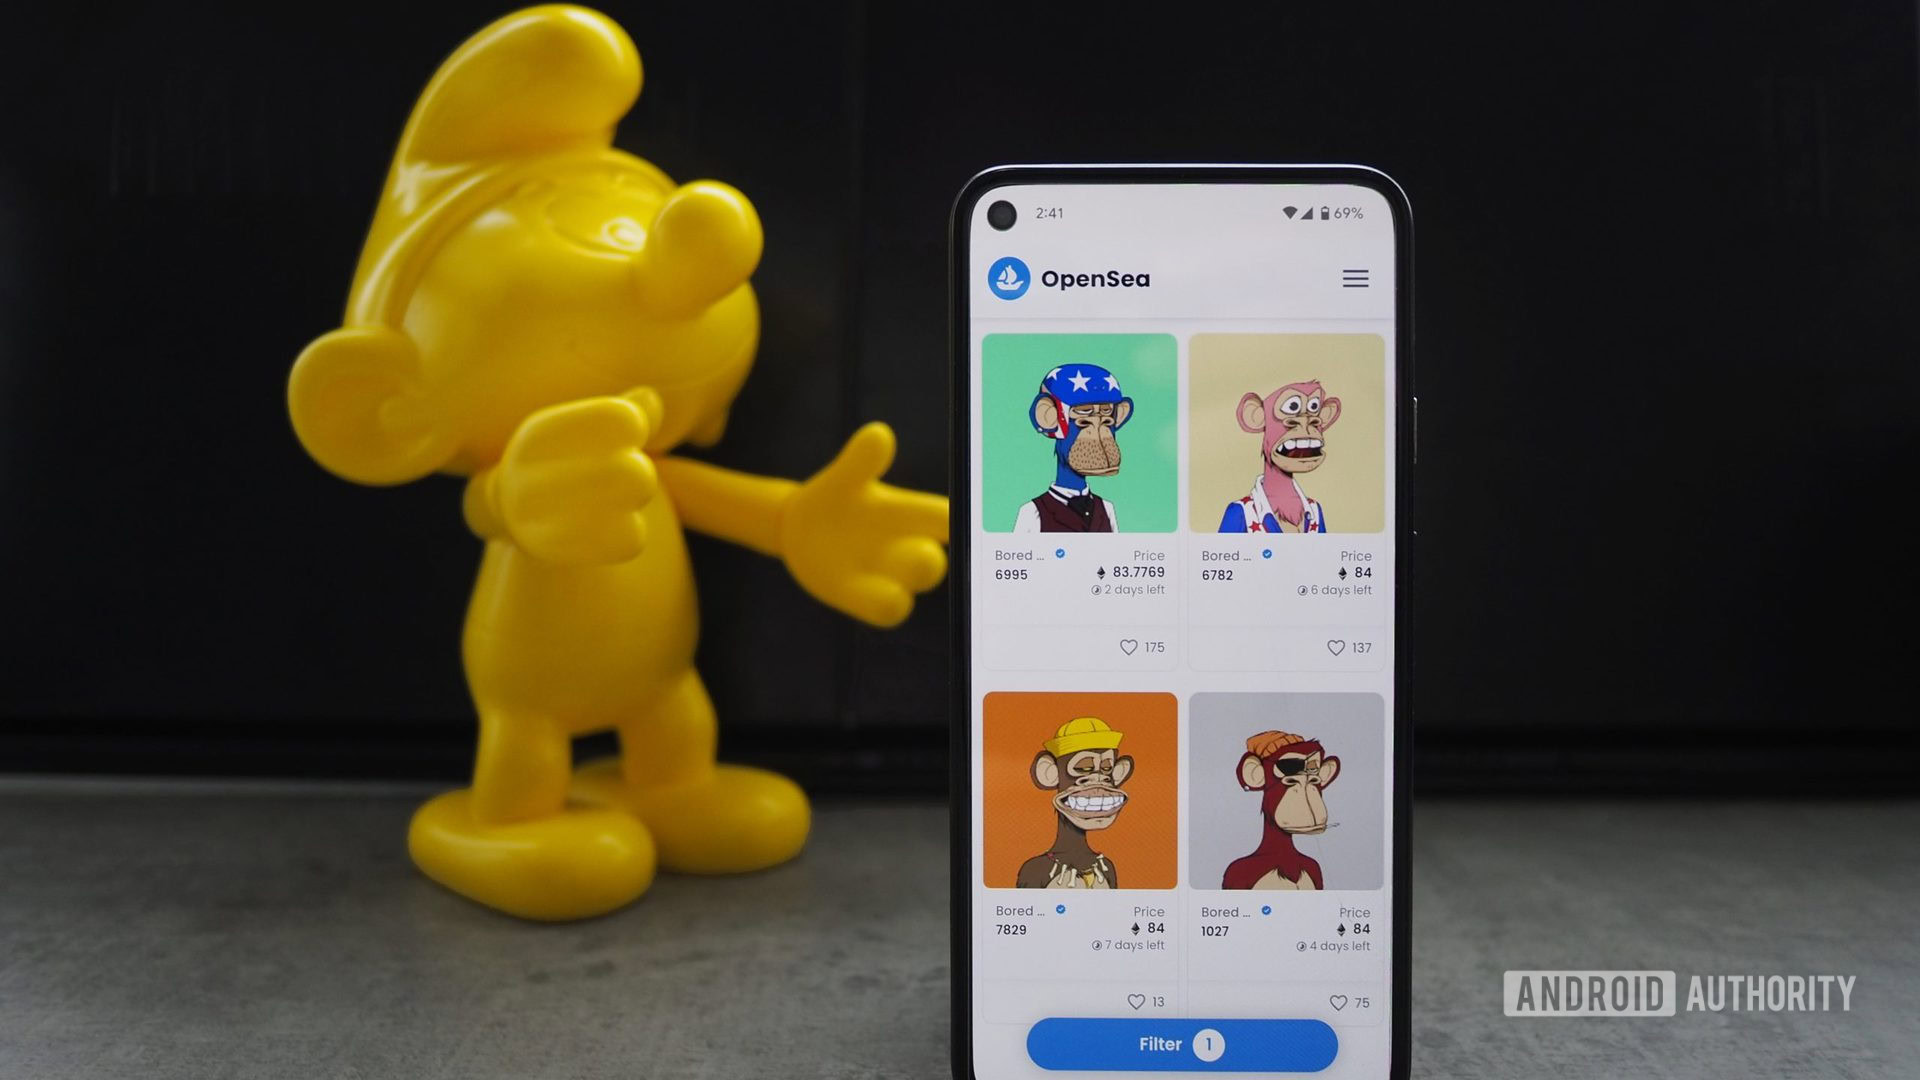 Opensea BoredApe NFTs shown on a Pixel 5 with a yellow smurf further in the background